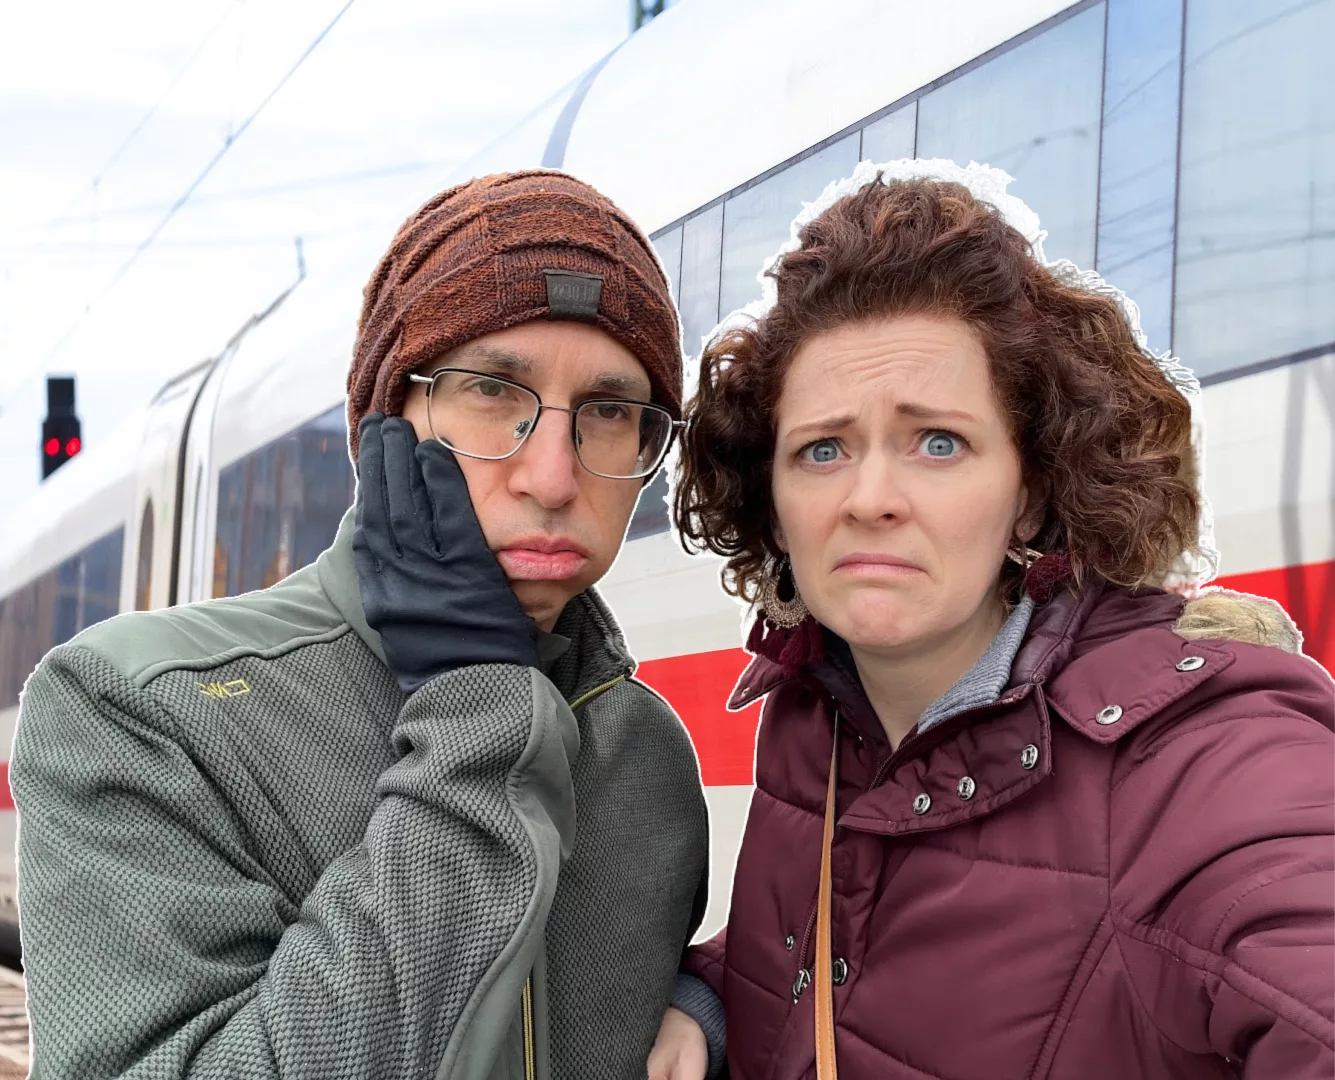 Our First Long-Distance ICE Train Trip in Germany was a Bit Bumpy